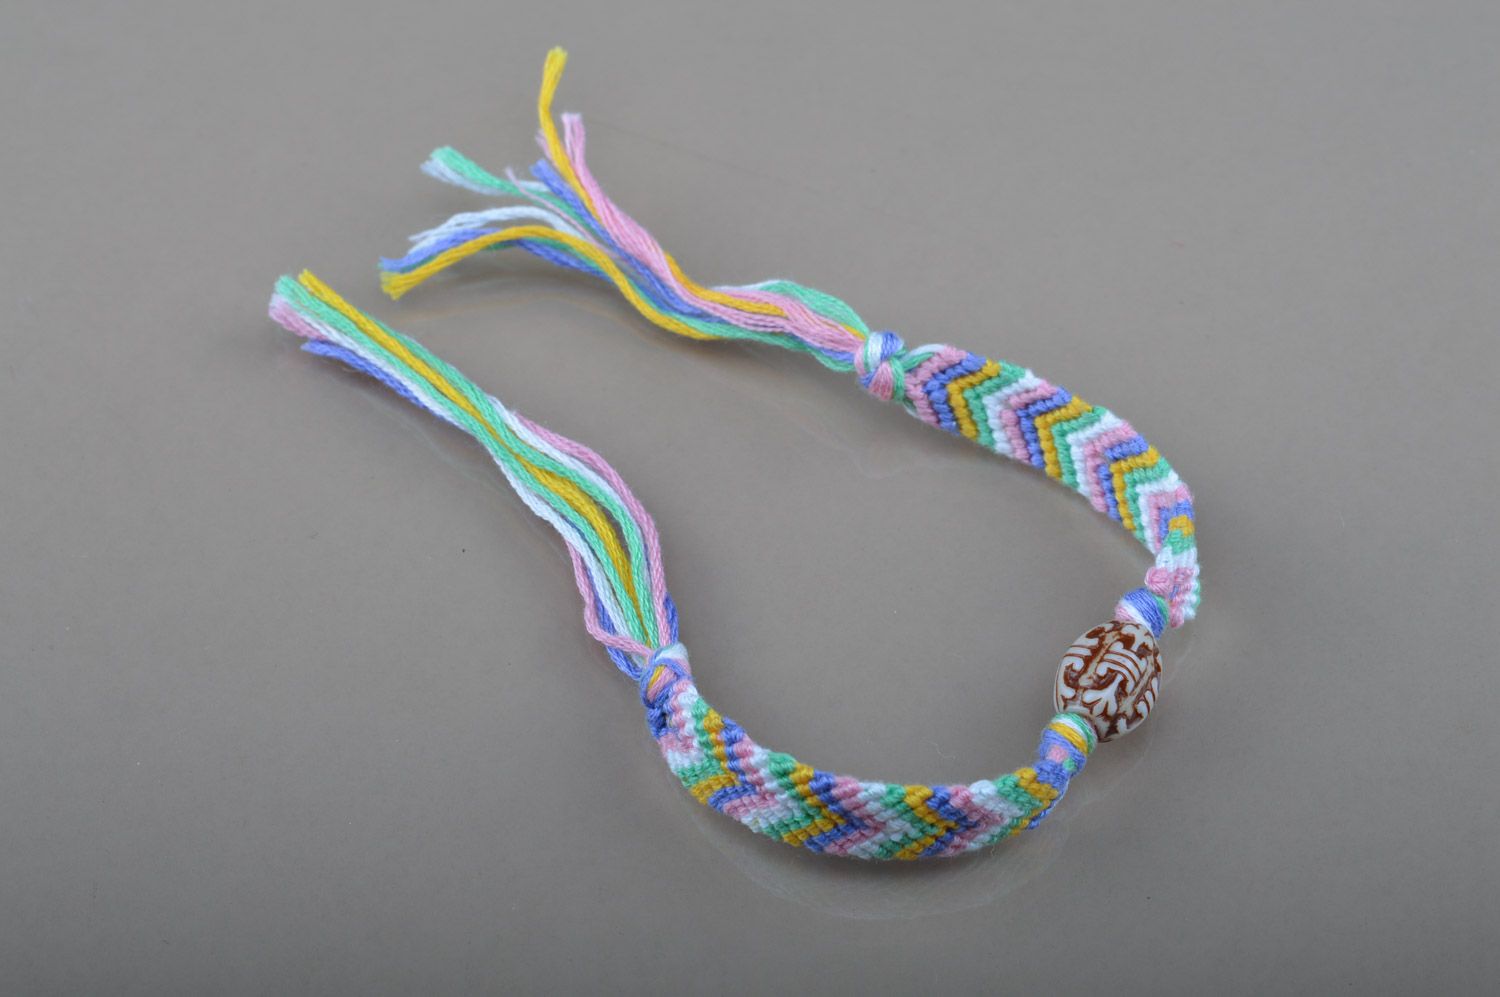 Simple handmade friendship bracelet woven of colorful embroidery floss with beads photo 2